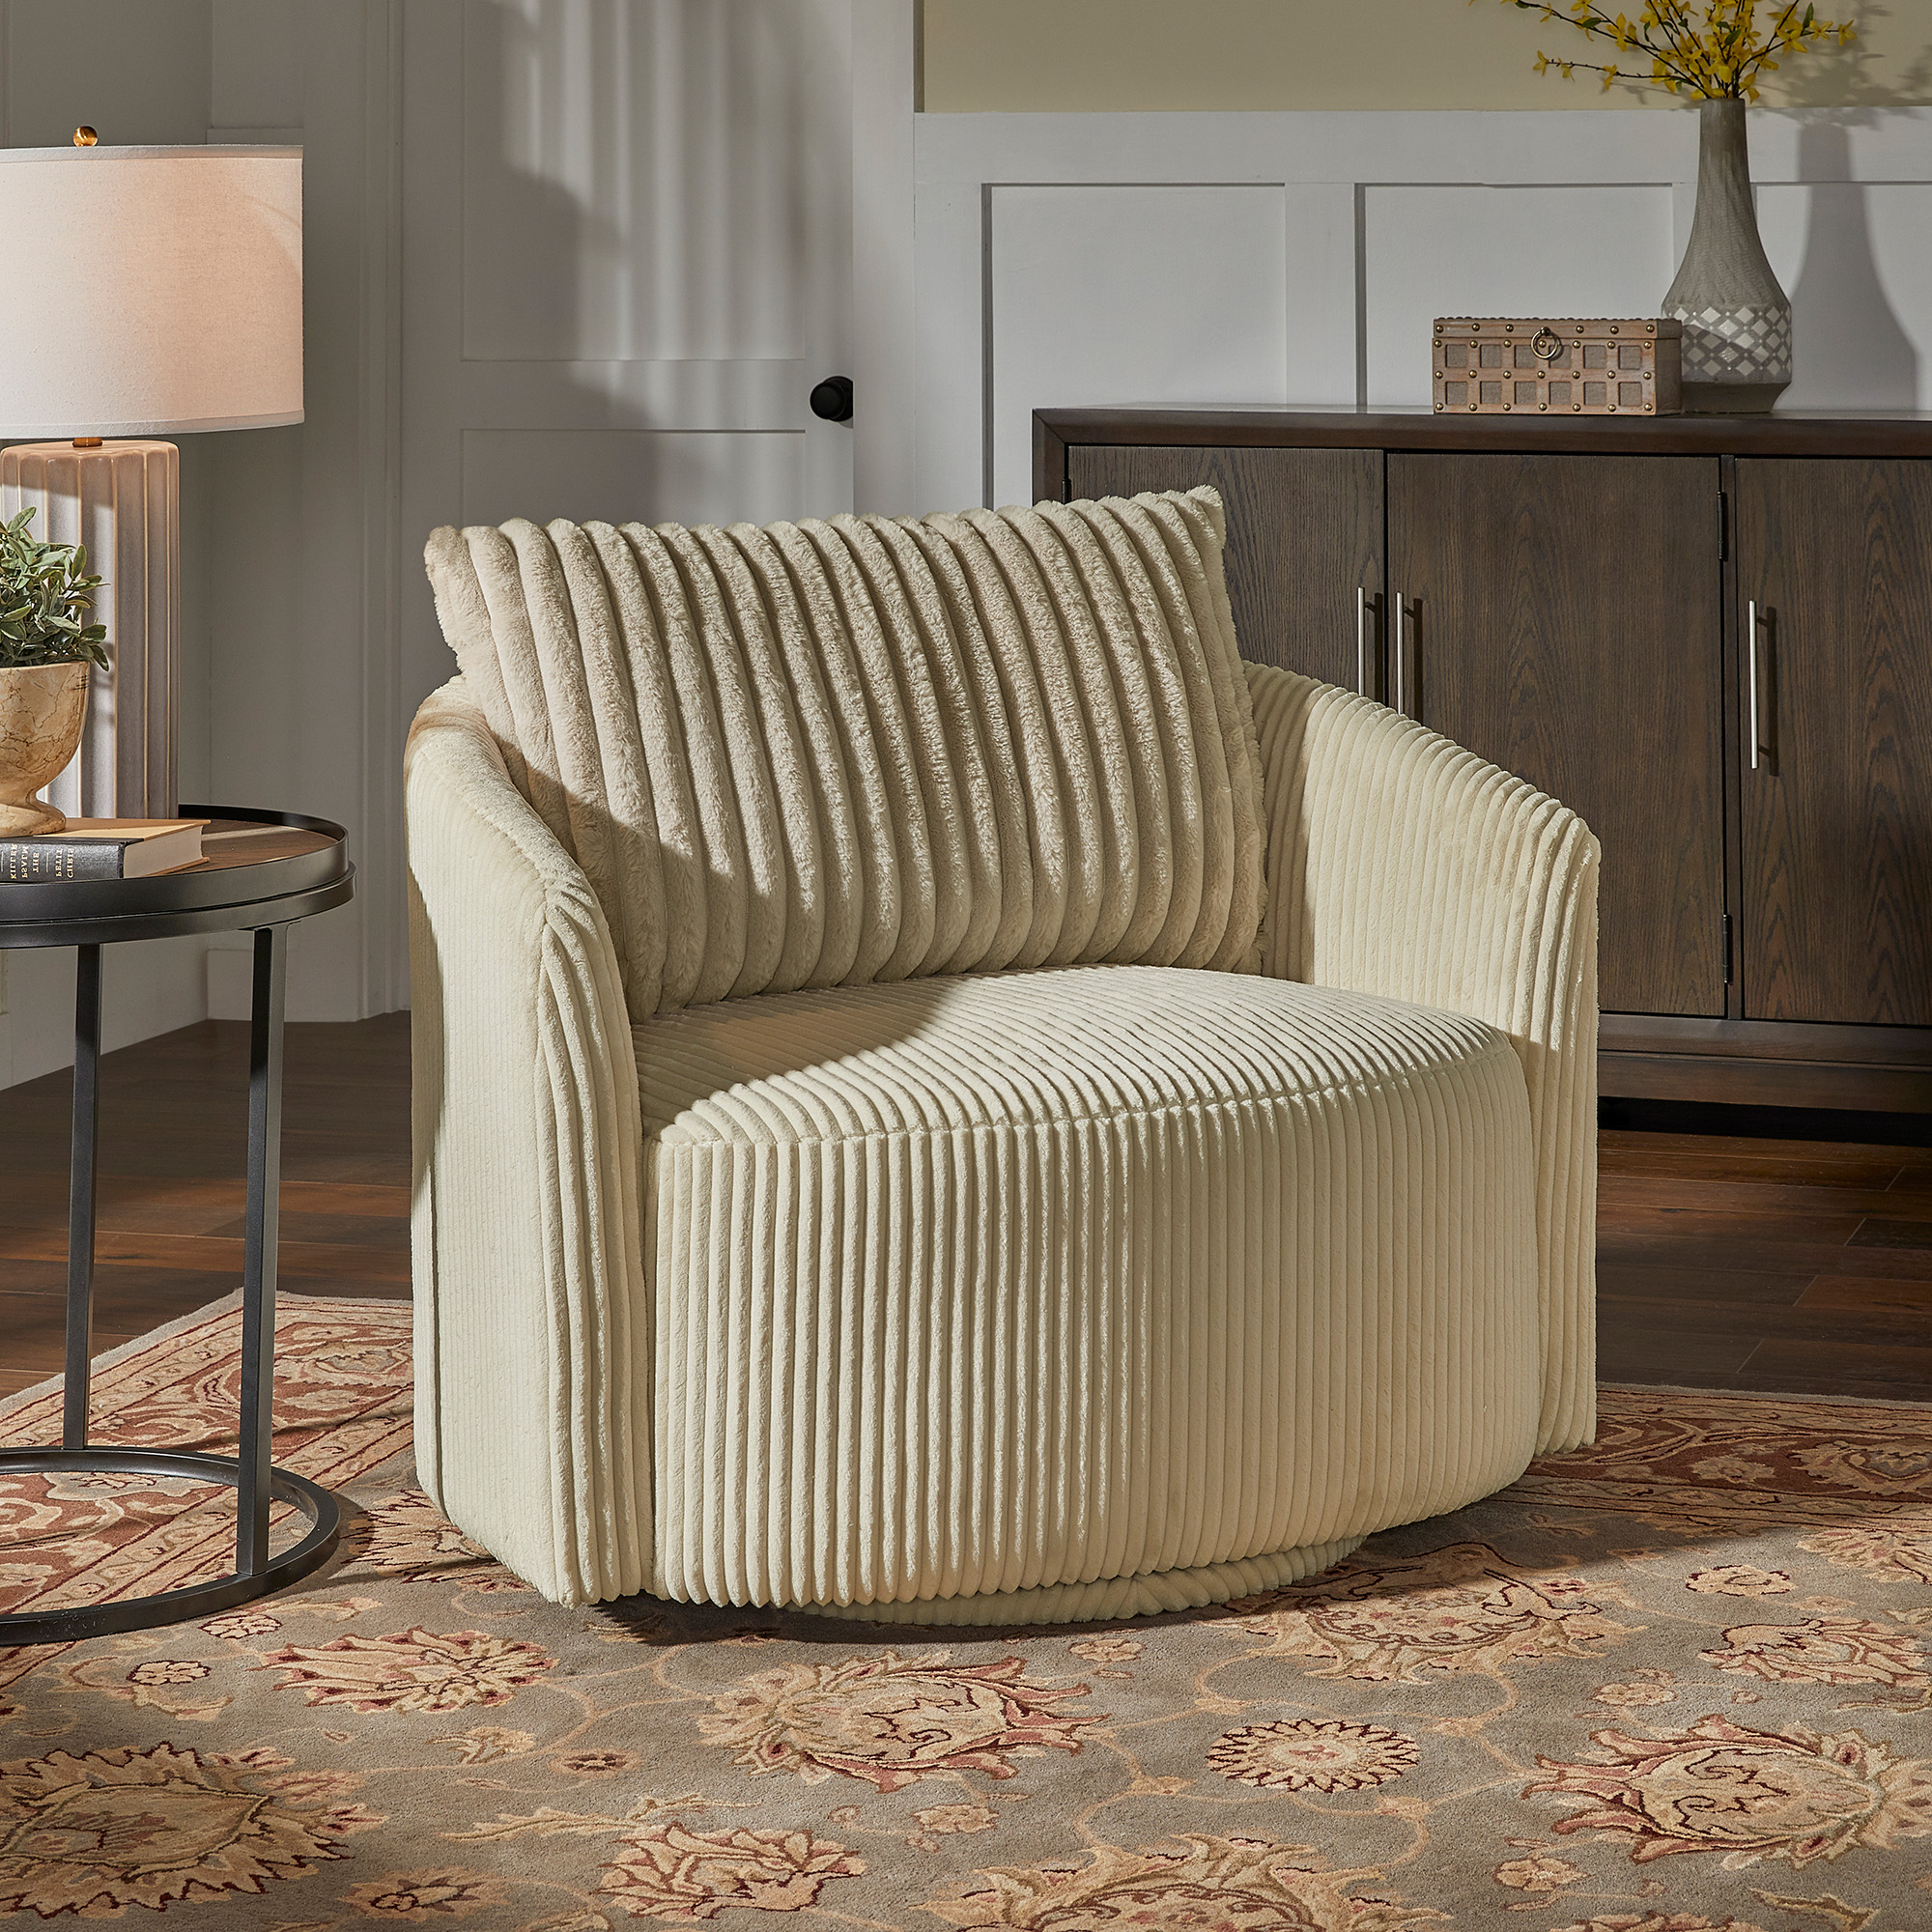 Oversized Wale Corduroy Swivel Accent Chair with Furry Channel Pillow